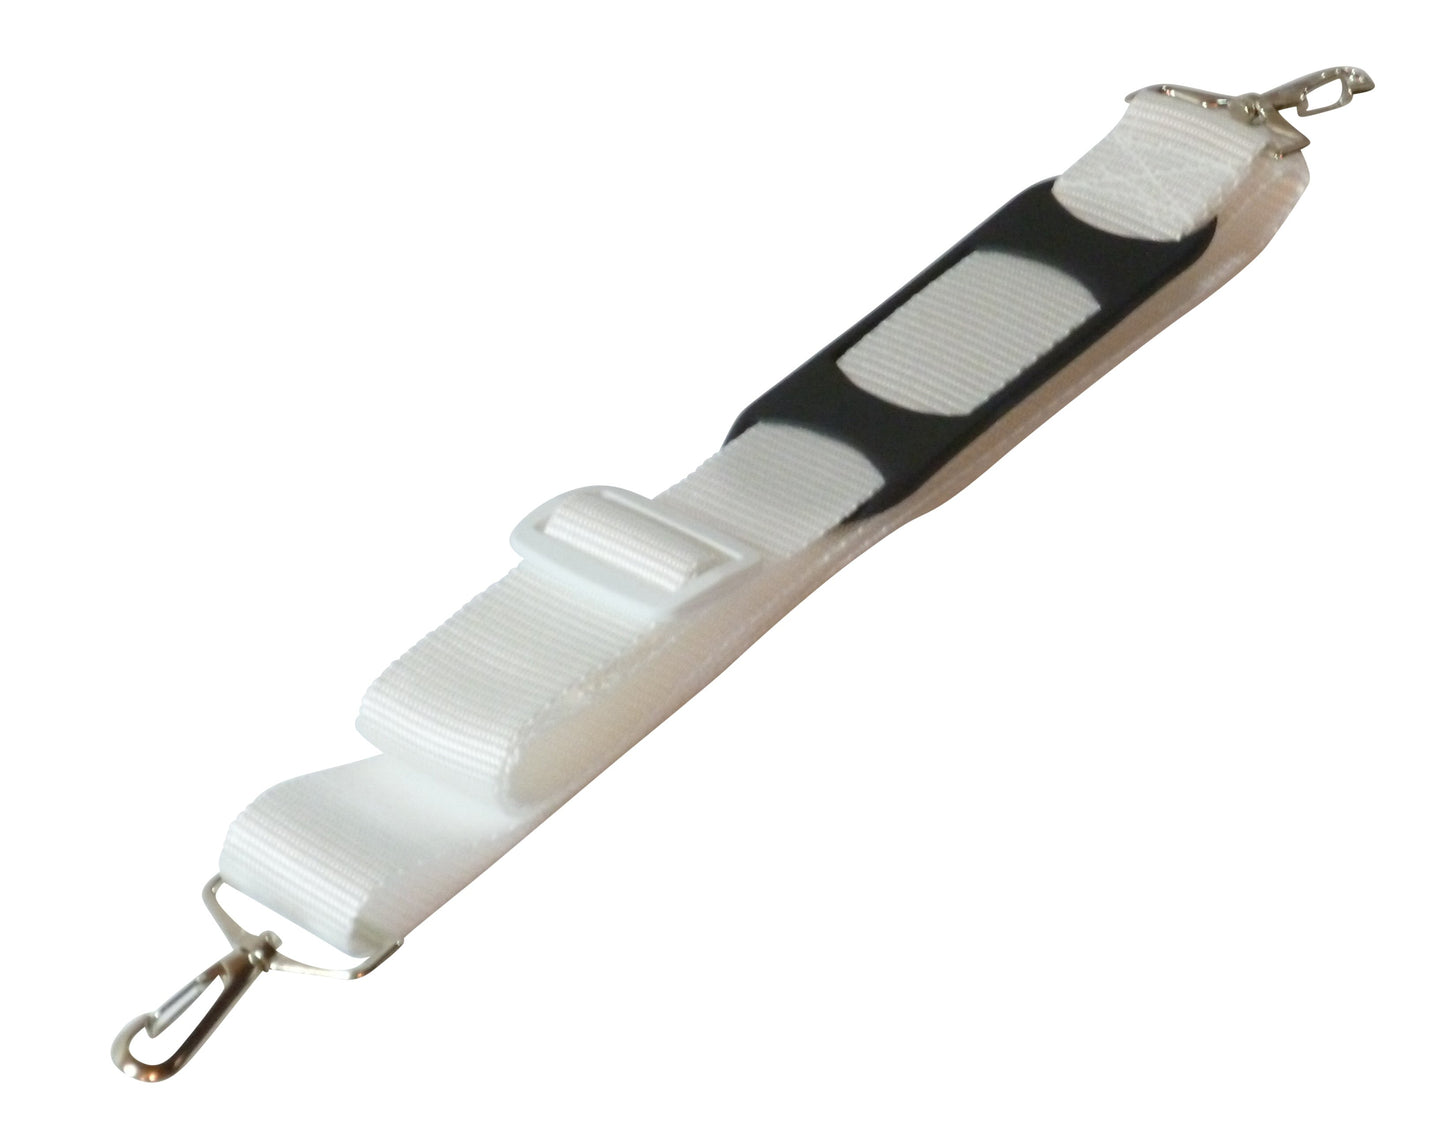 38mm Bag Strap with Metal Buckles and Shoulder Pad, 150cm in white